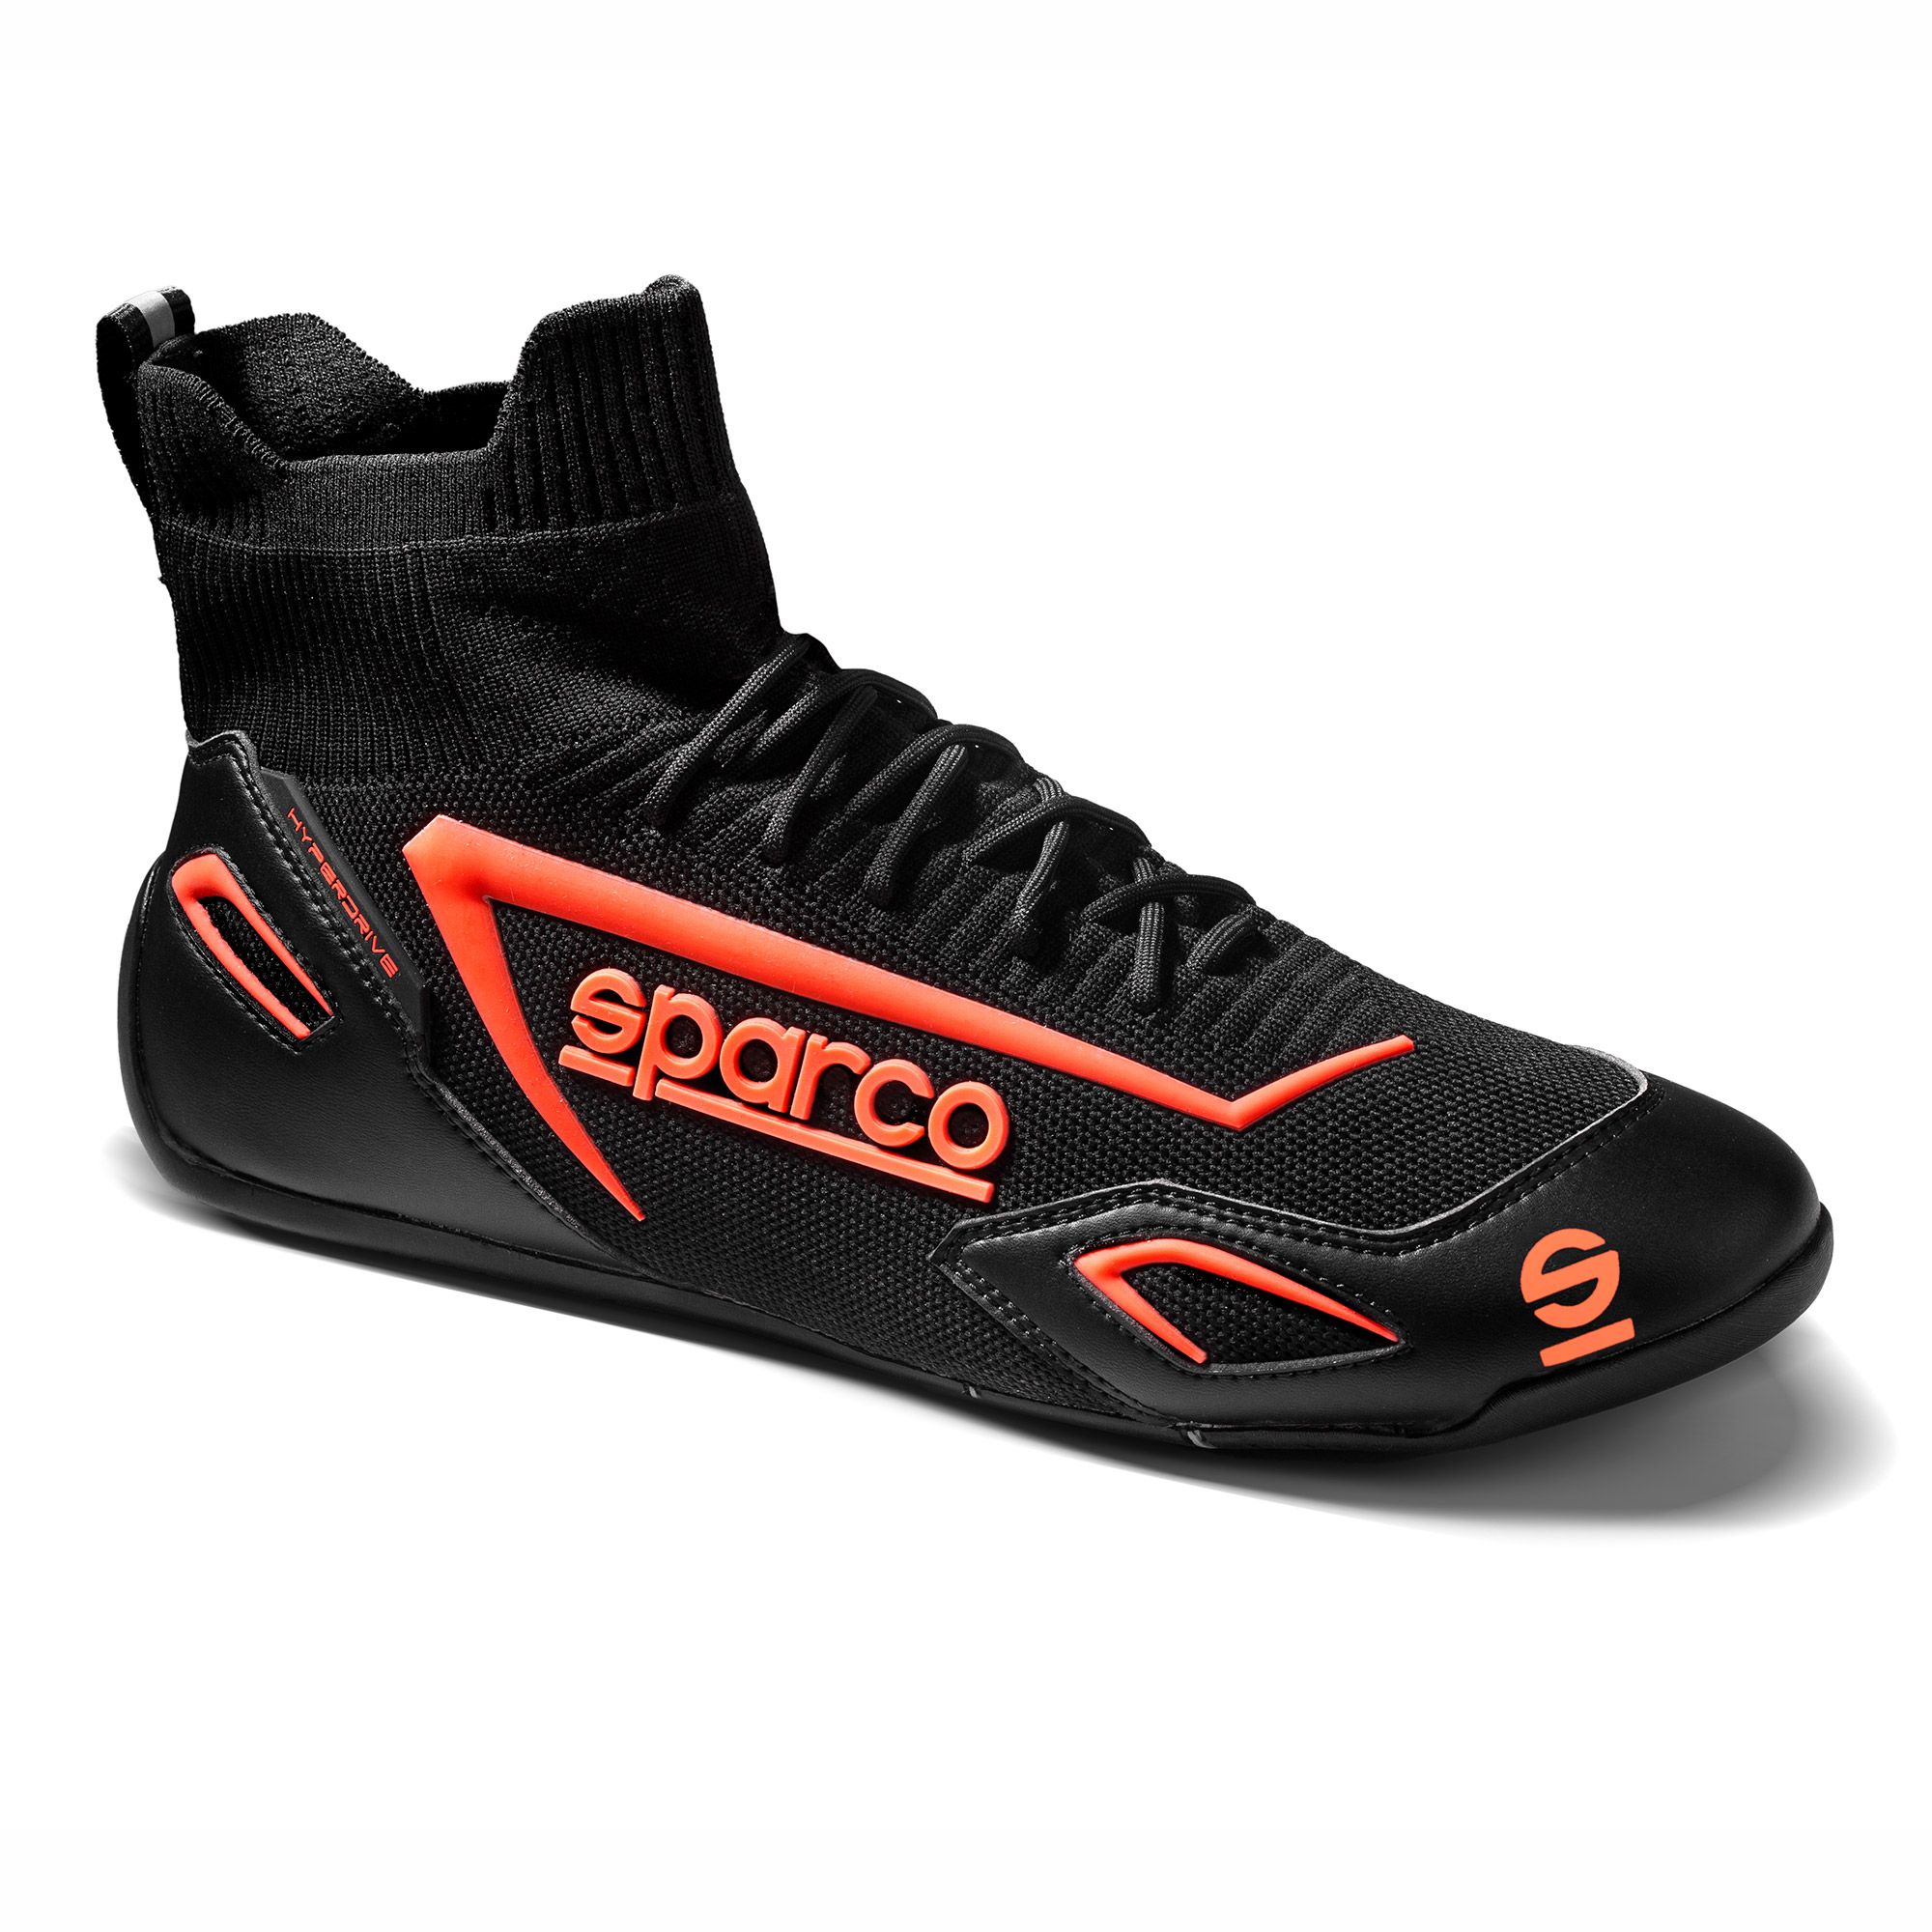 SPARCO 00129344NRRS Gaming sim racing shoes HYPERDRIVE, black/red, size 44 Photo-0 